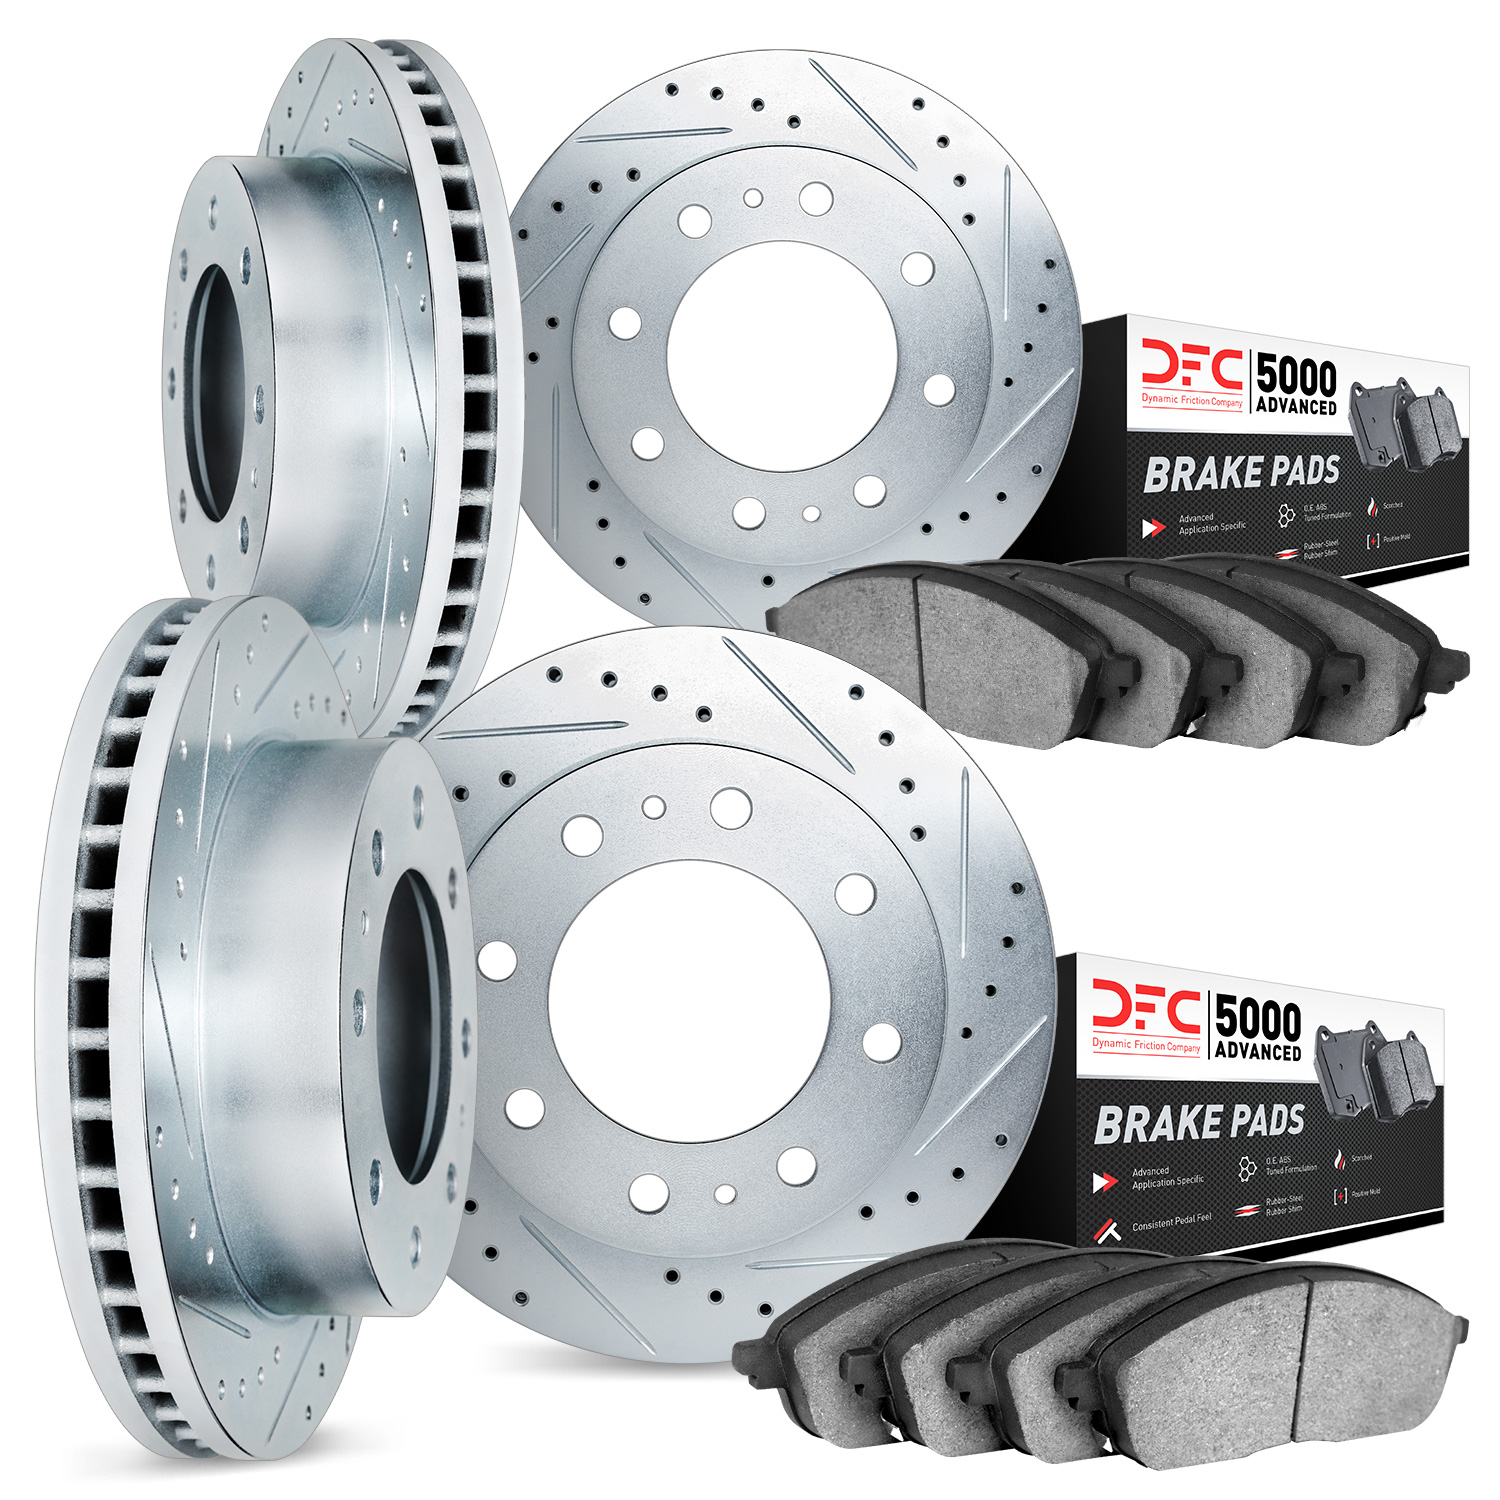 7504-54337 Drilled/Slotted Brake Rotors w/5000 Advanced Brake Pads Kit [Silver], 1999-2002 Ford/Lincoln/Mercury/Mazda, Position: